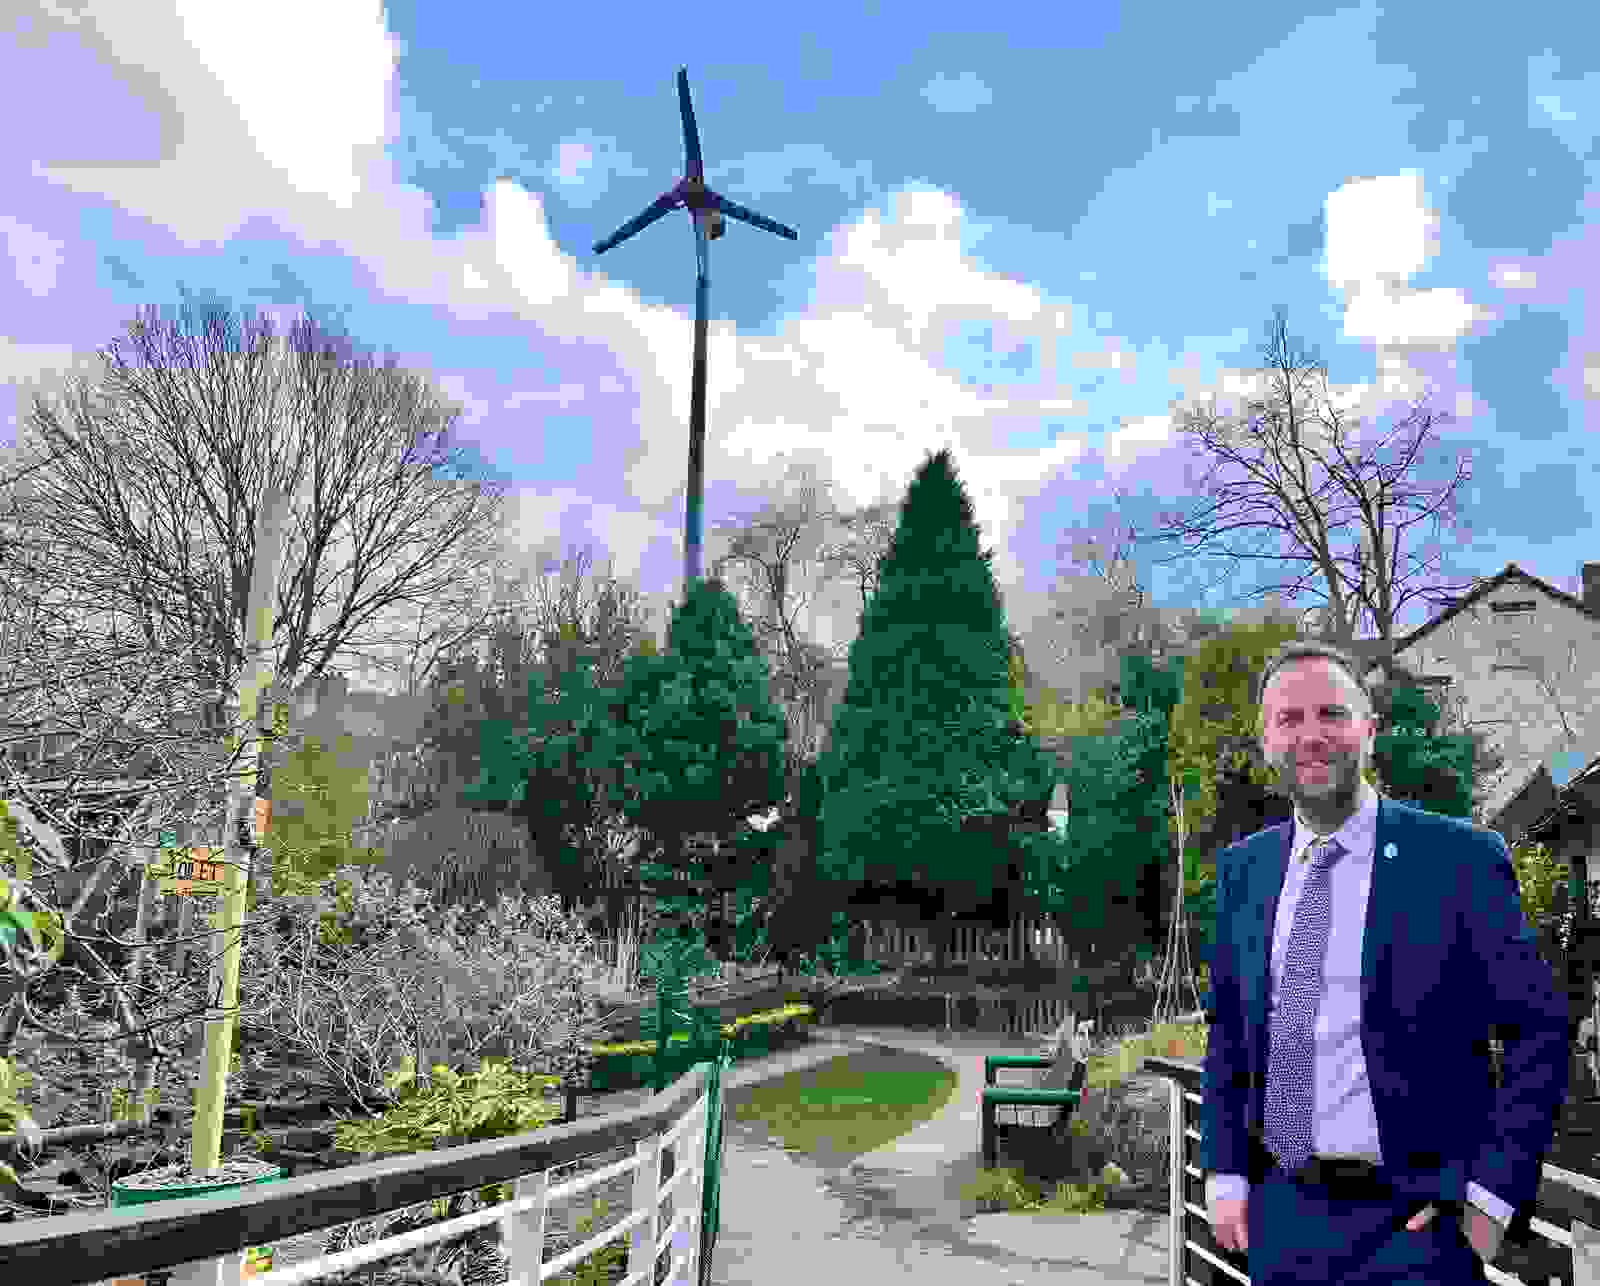 Cllr Ben Miskell stands in the foreground with a wind turbine in the background, scattered throughout the picture are a number of trees and a path disappears off into the distance